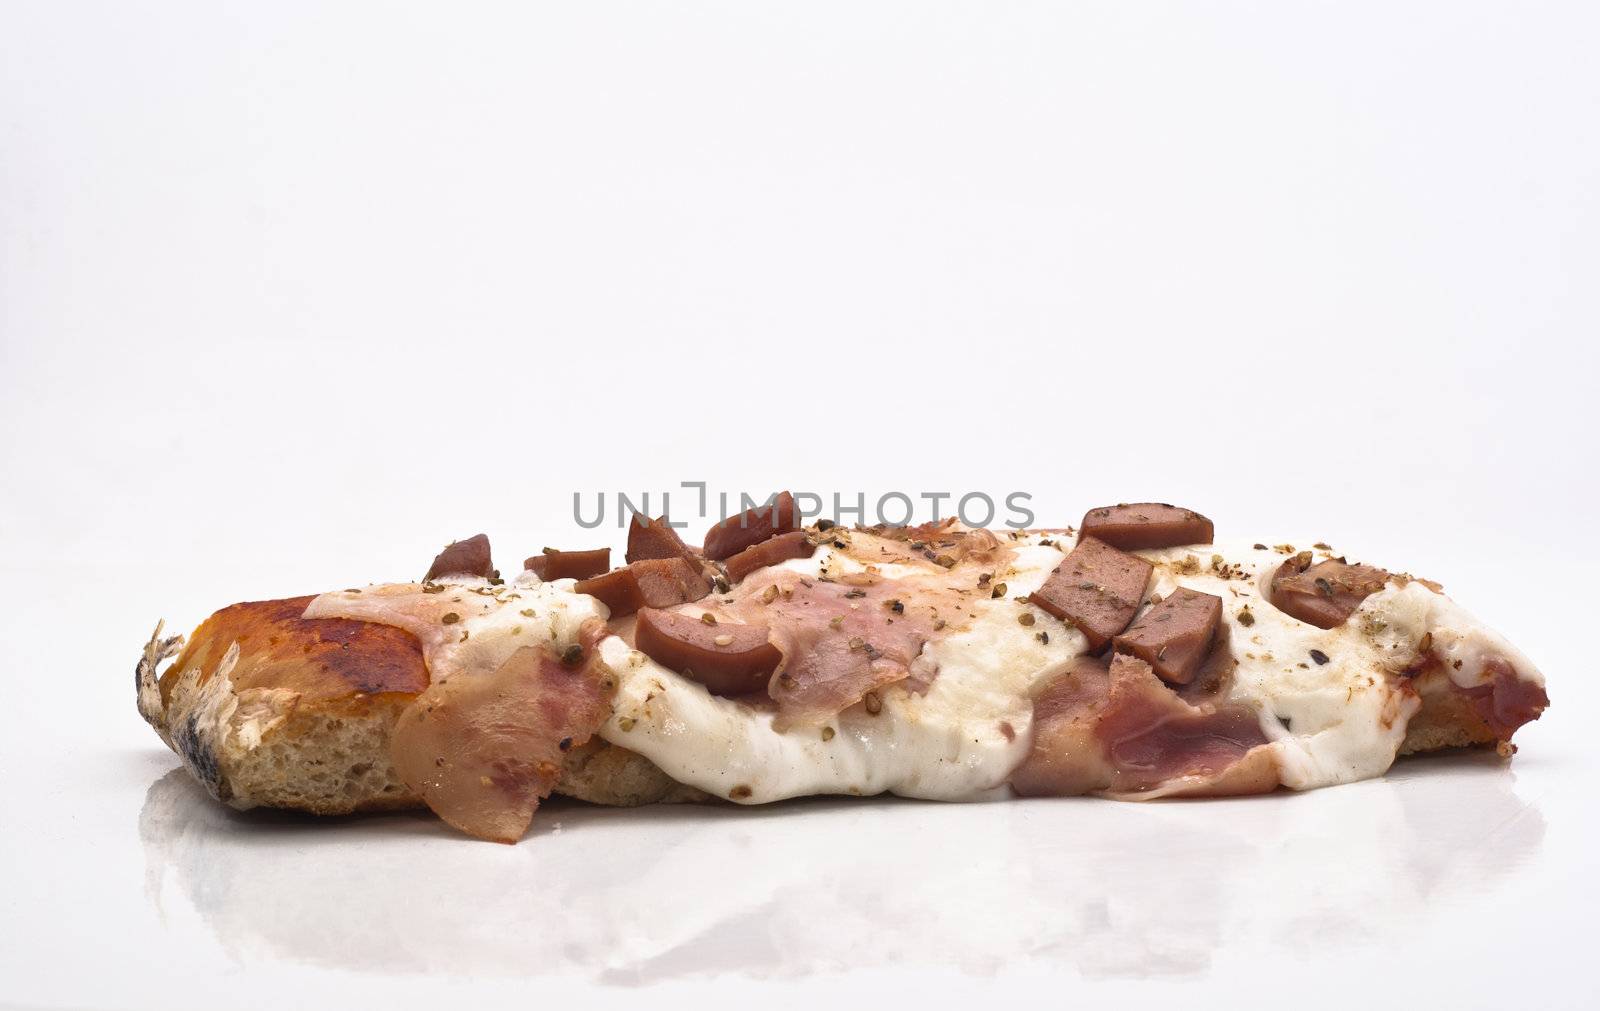 Sicilian rotisserie. Pizza with sausages isolated on white.